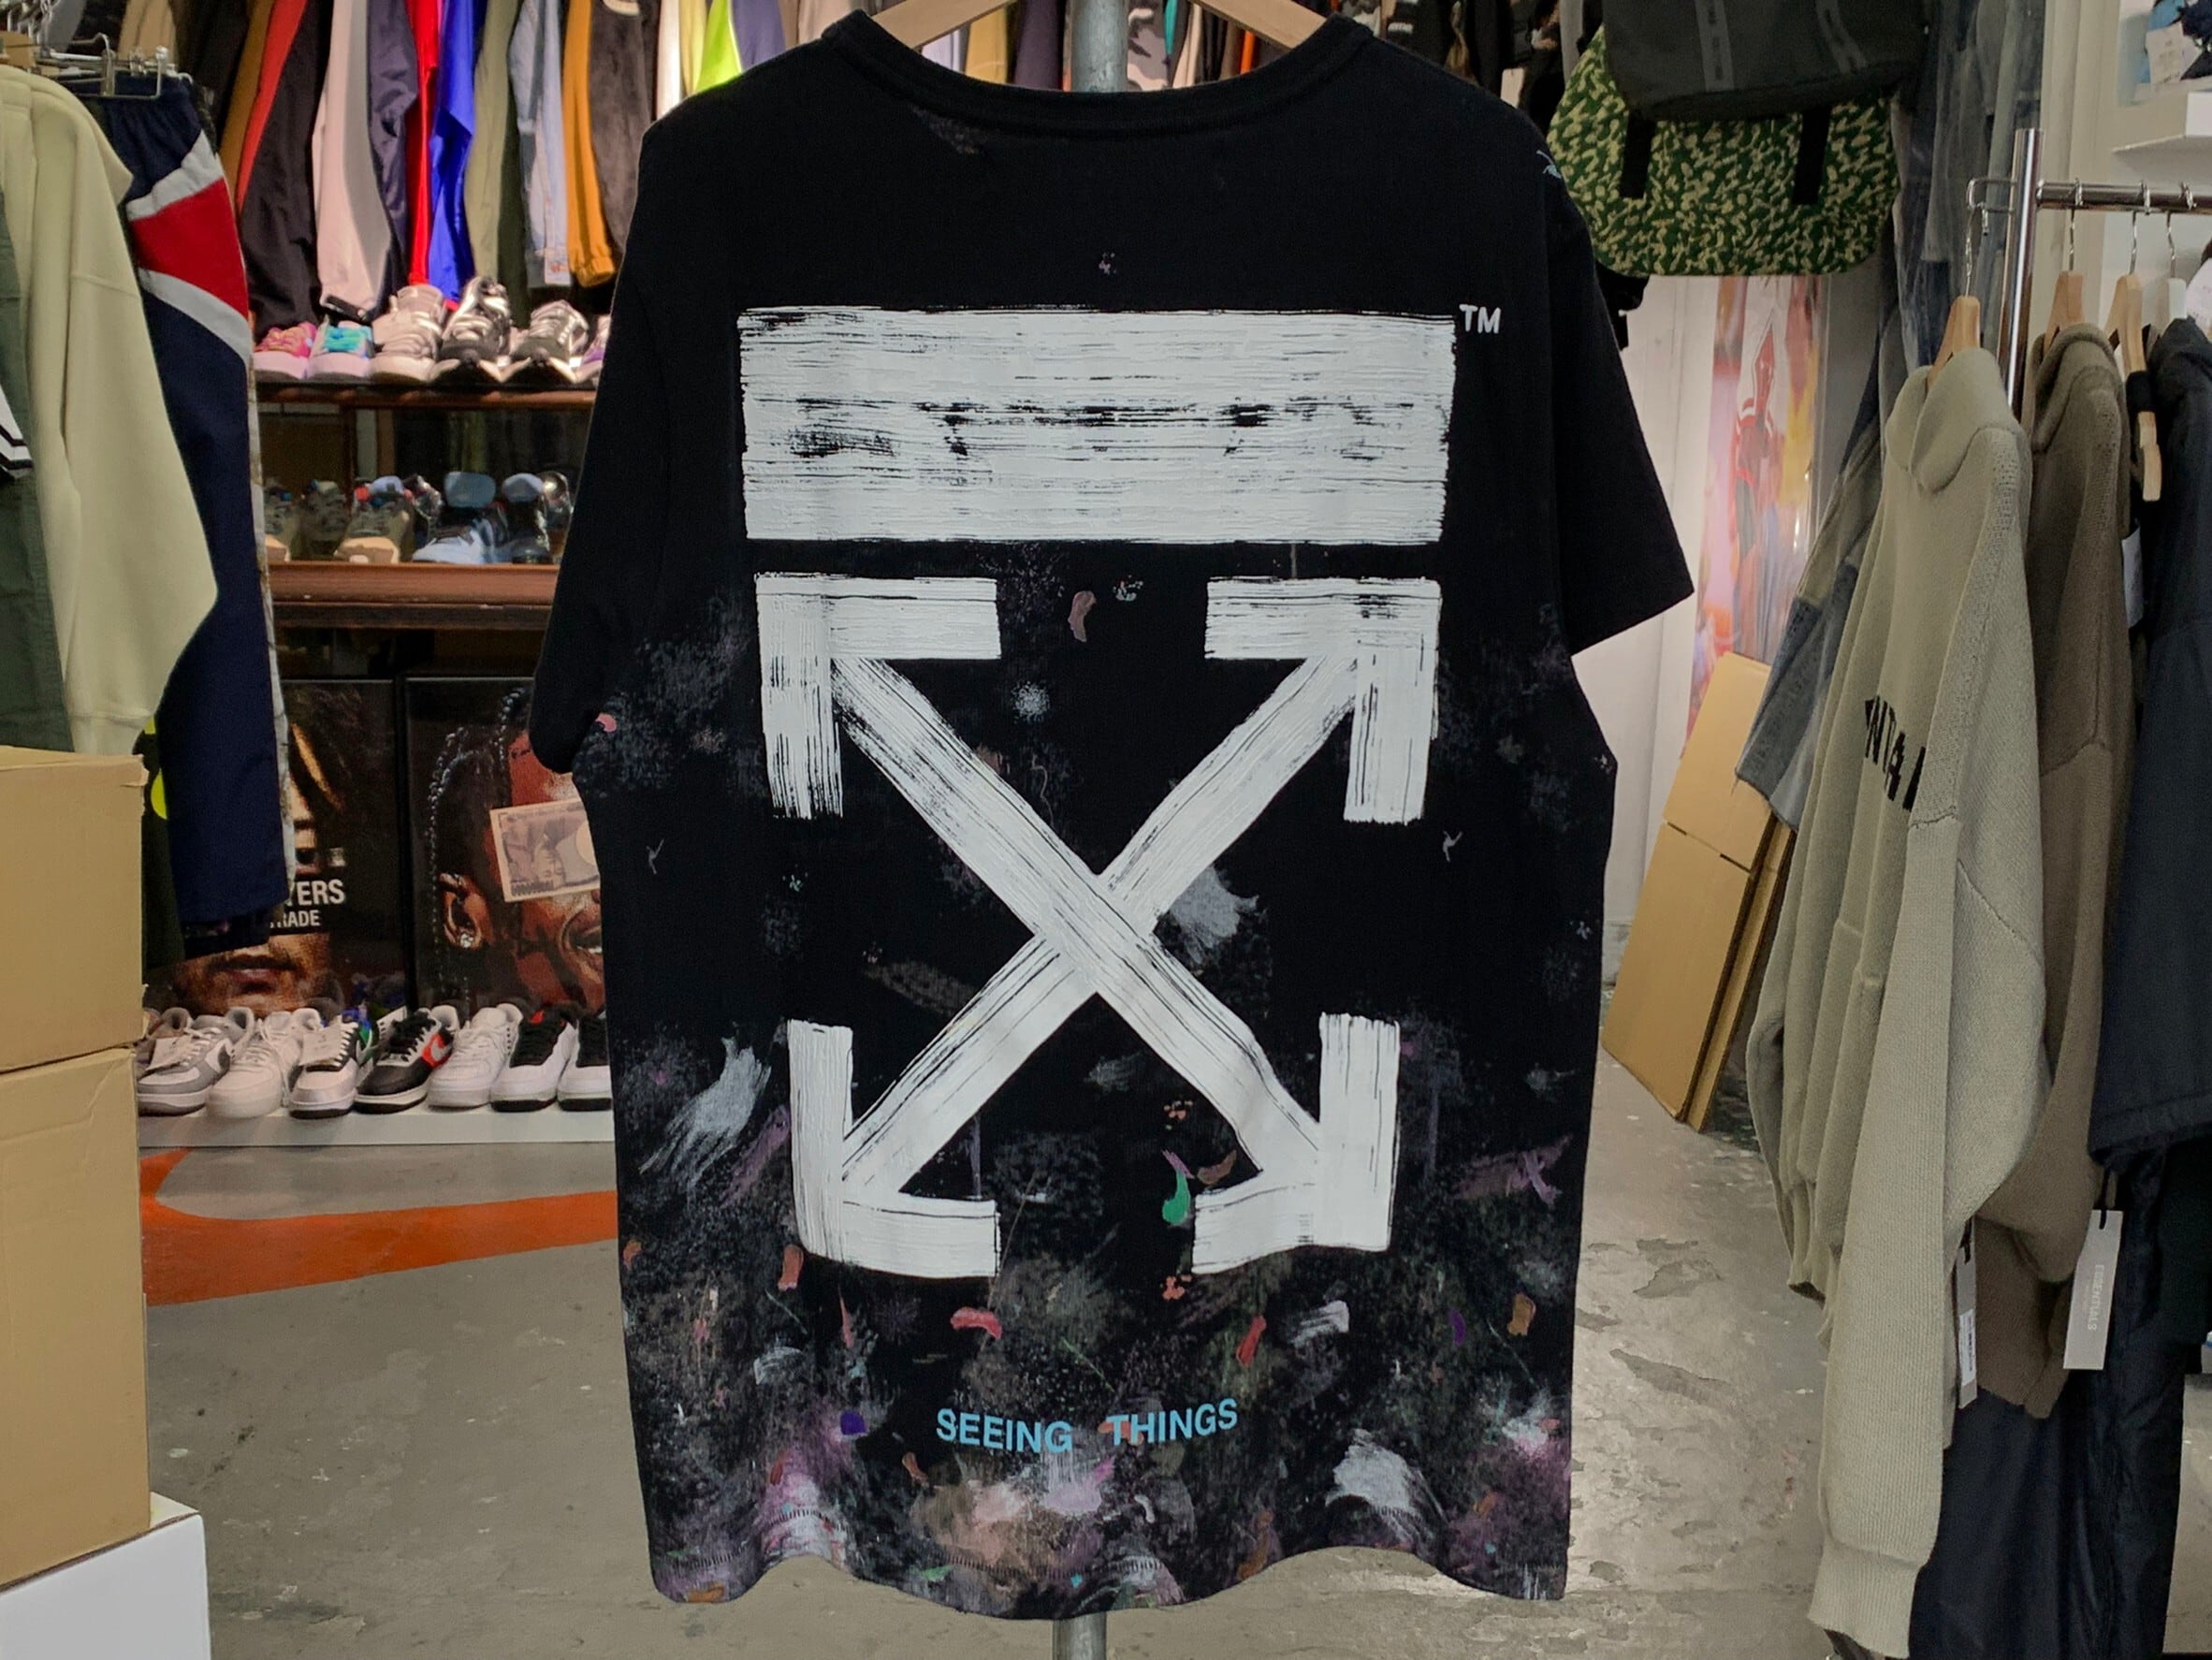 OFF-White Galaxt Tee